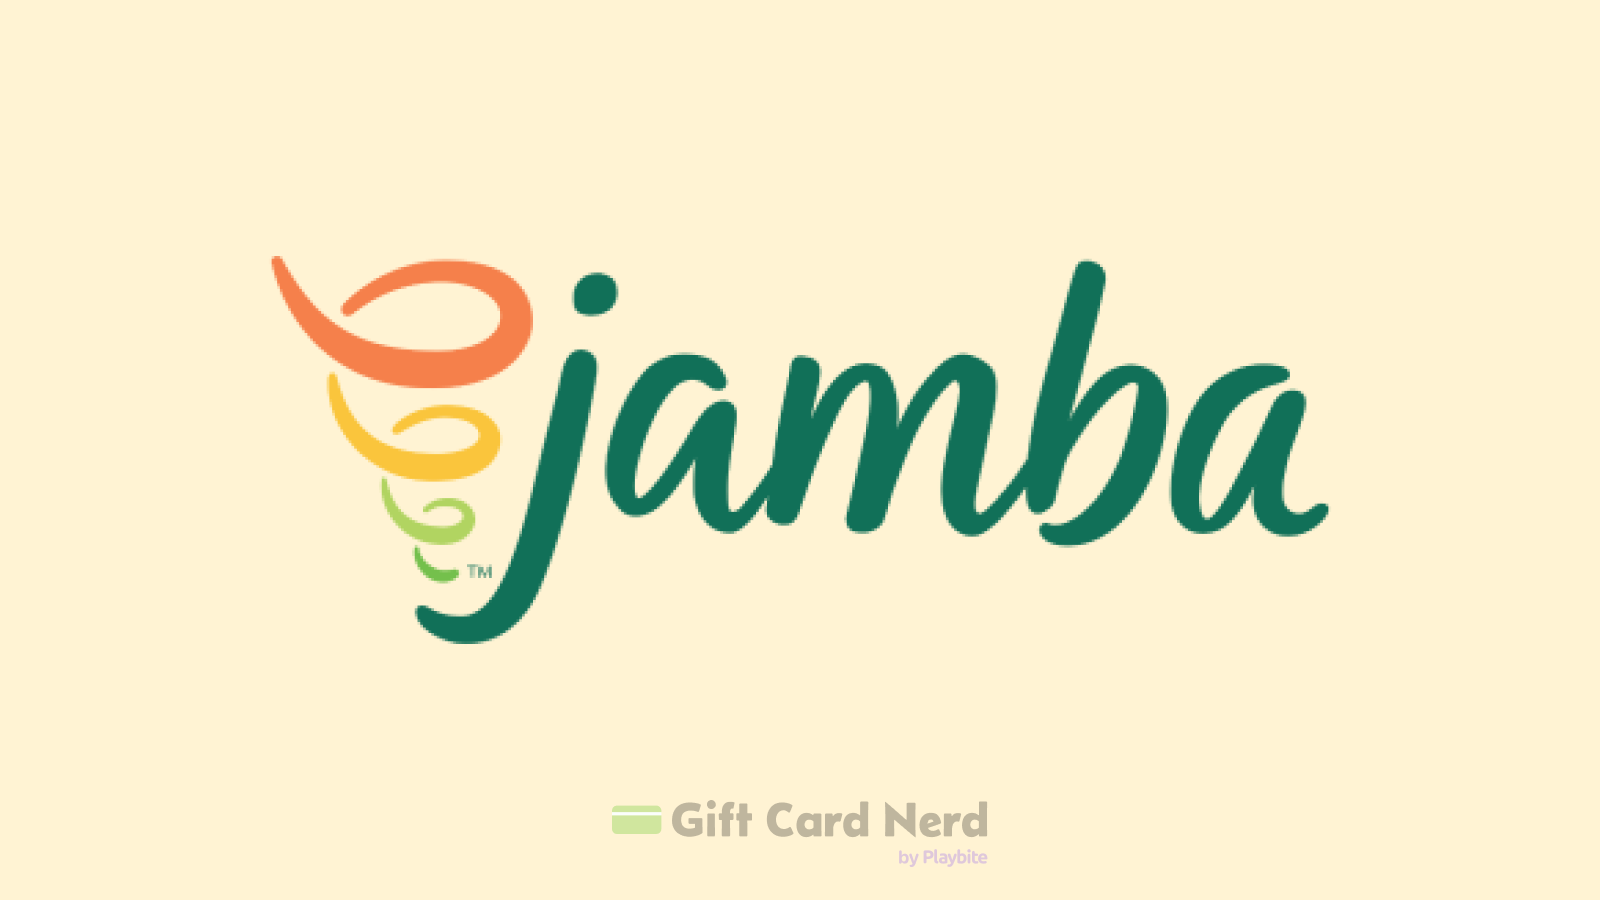 Can I Use a Jamba Juice Gift Card on PayPal?